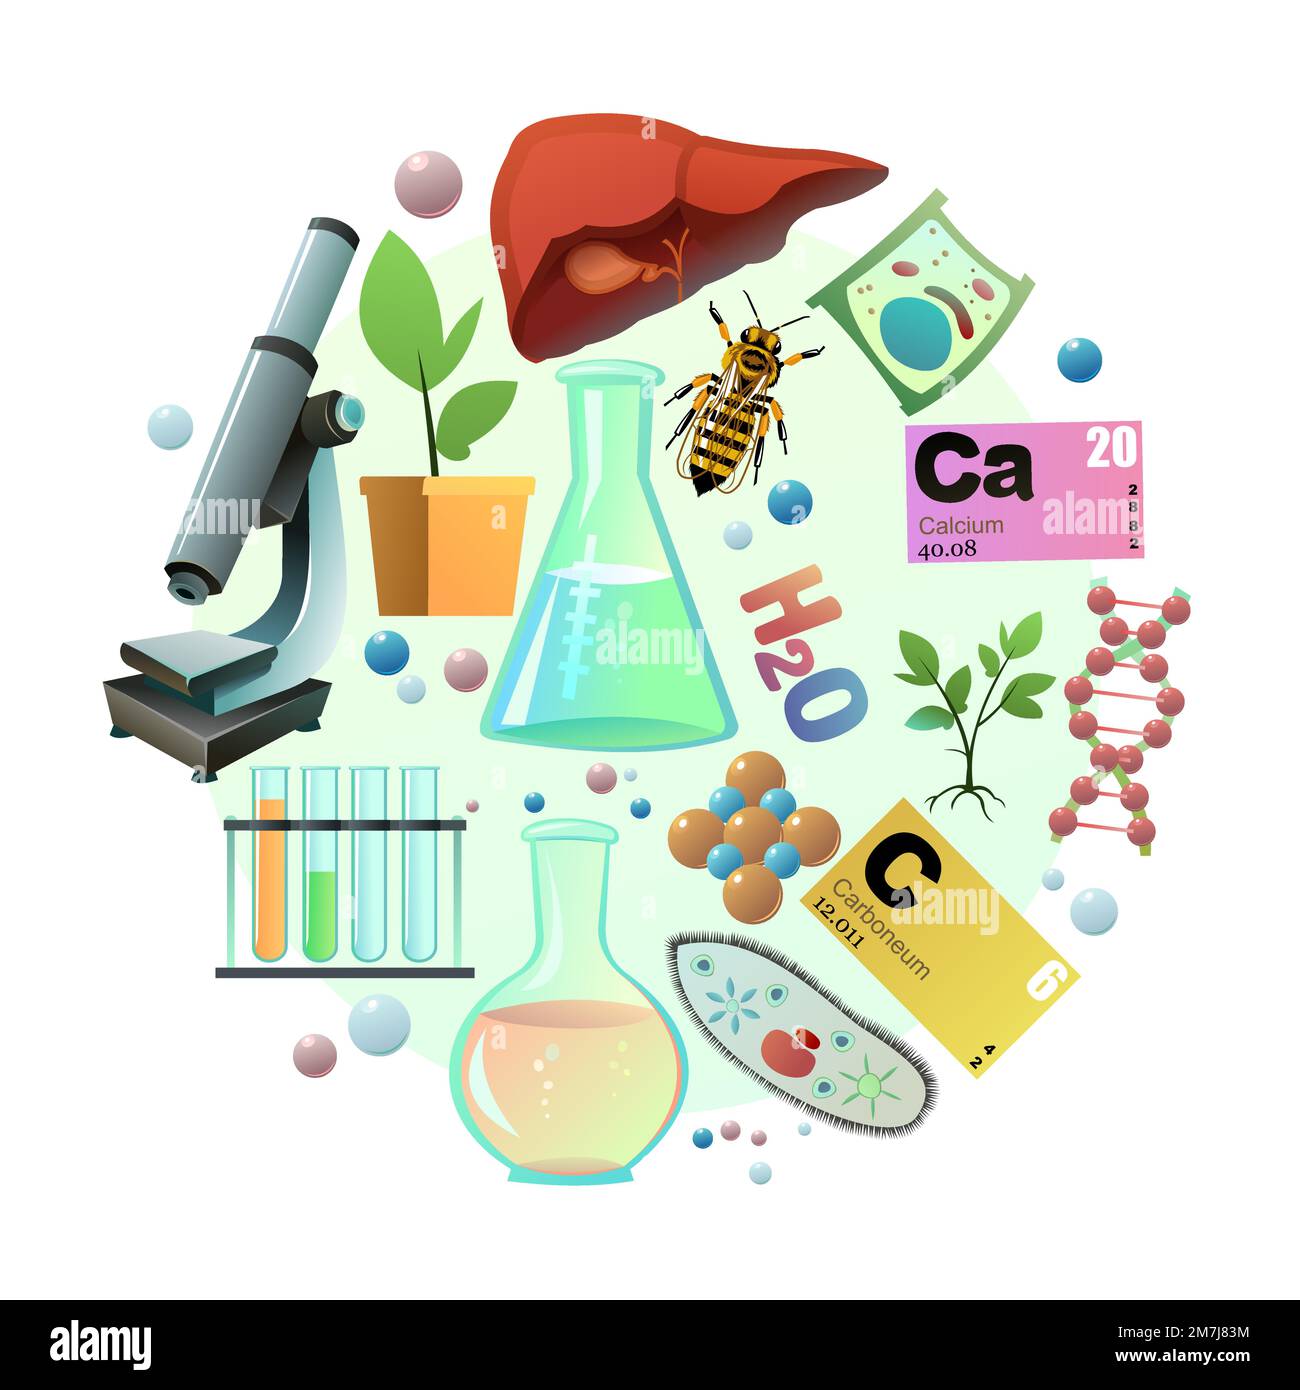 Chemistry picture in form of circle. Science items picture. Study of living cells of plants, animals and humans. Isolated on white background. Vector. Stock Vector